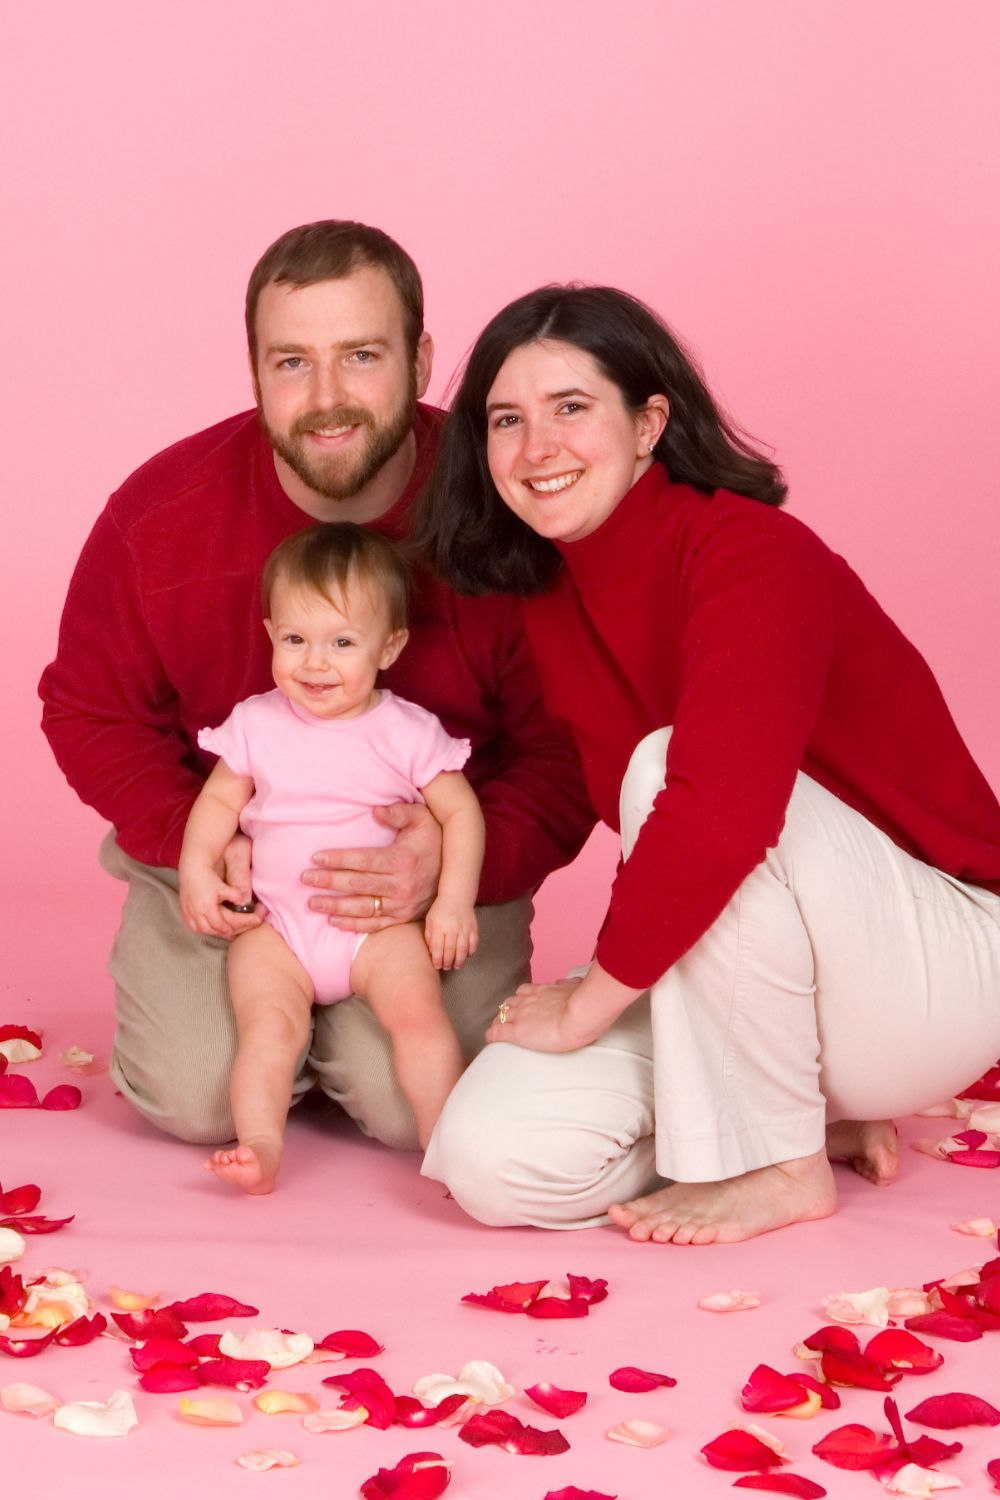 a family of mom, dad, and baby on a pink background surrounded by rose petals.